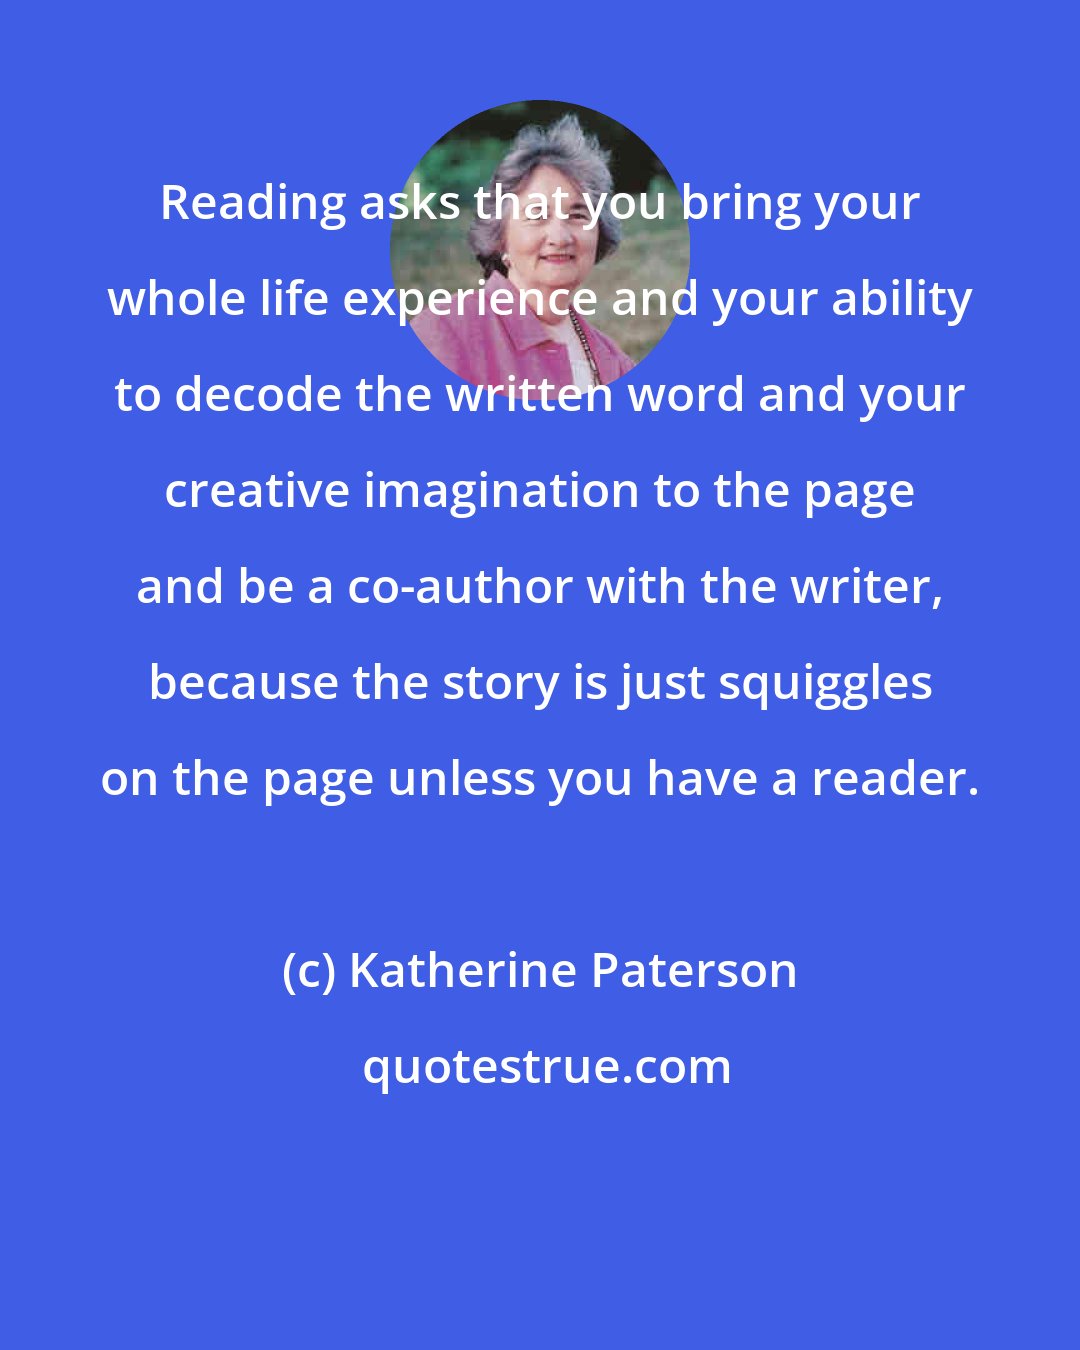 Katherine Paterson: Reading asks that you bring your whole life experience and your ability to decode the written word and your creative imagination to the page and be a co-author with the writer, because the story is just squiggles on the page unless you have a reader.